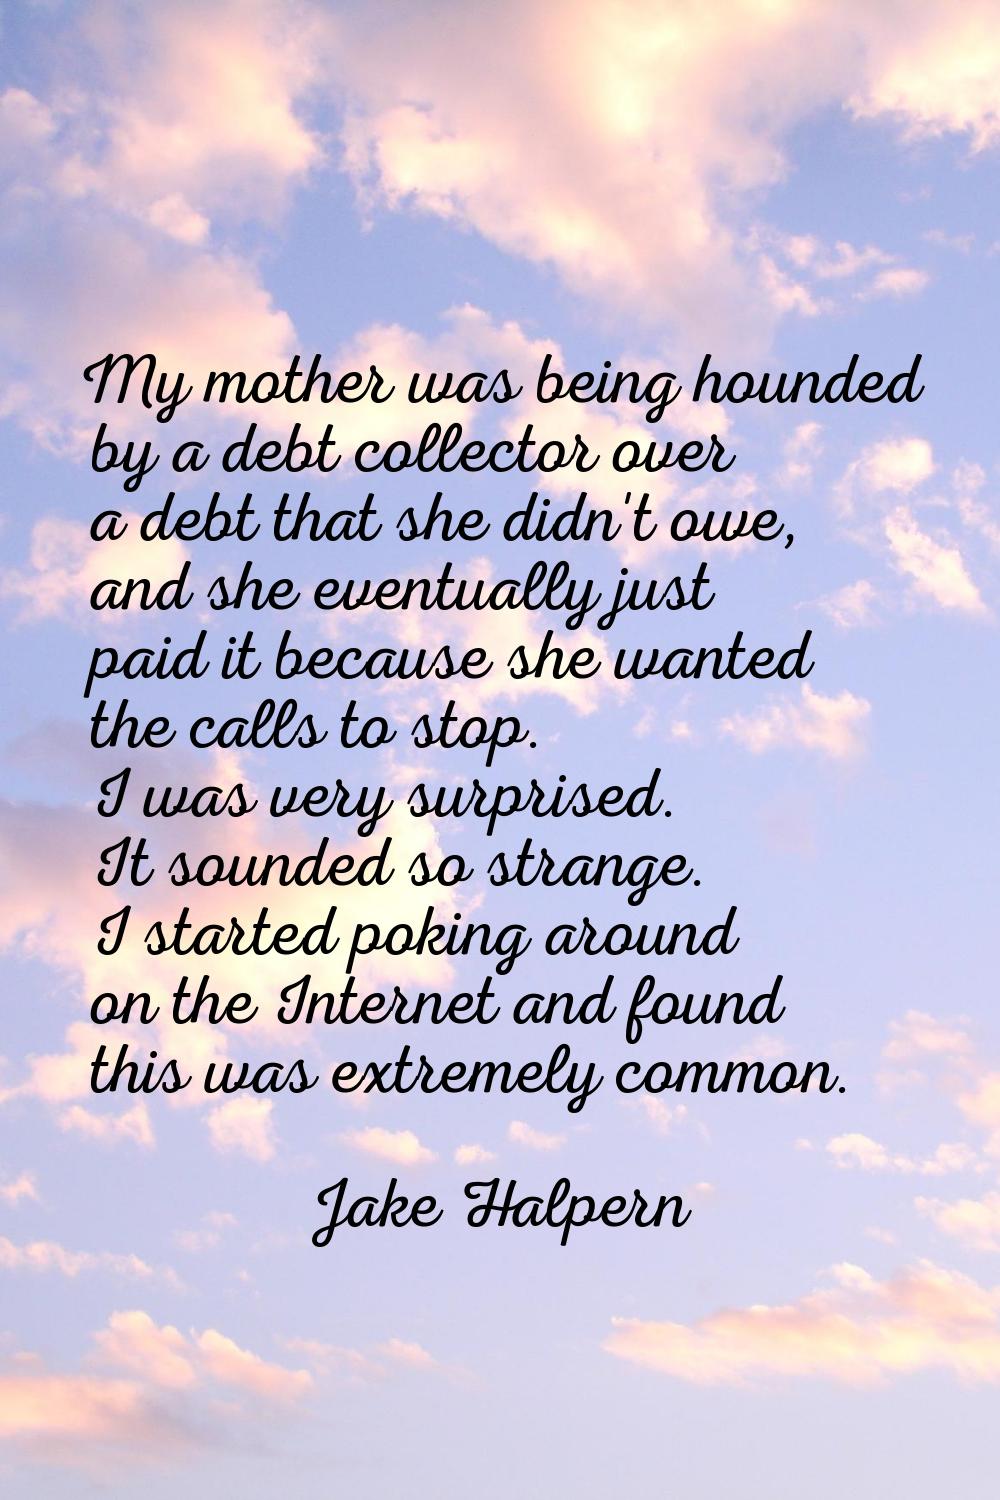 My mother was being hounded by a debt collector over a debt that she didn't owe, and she eventually